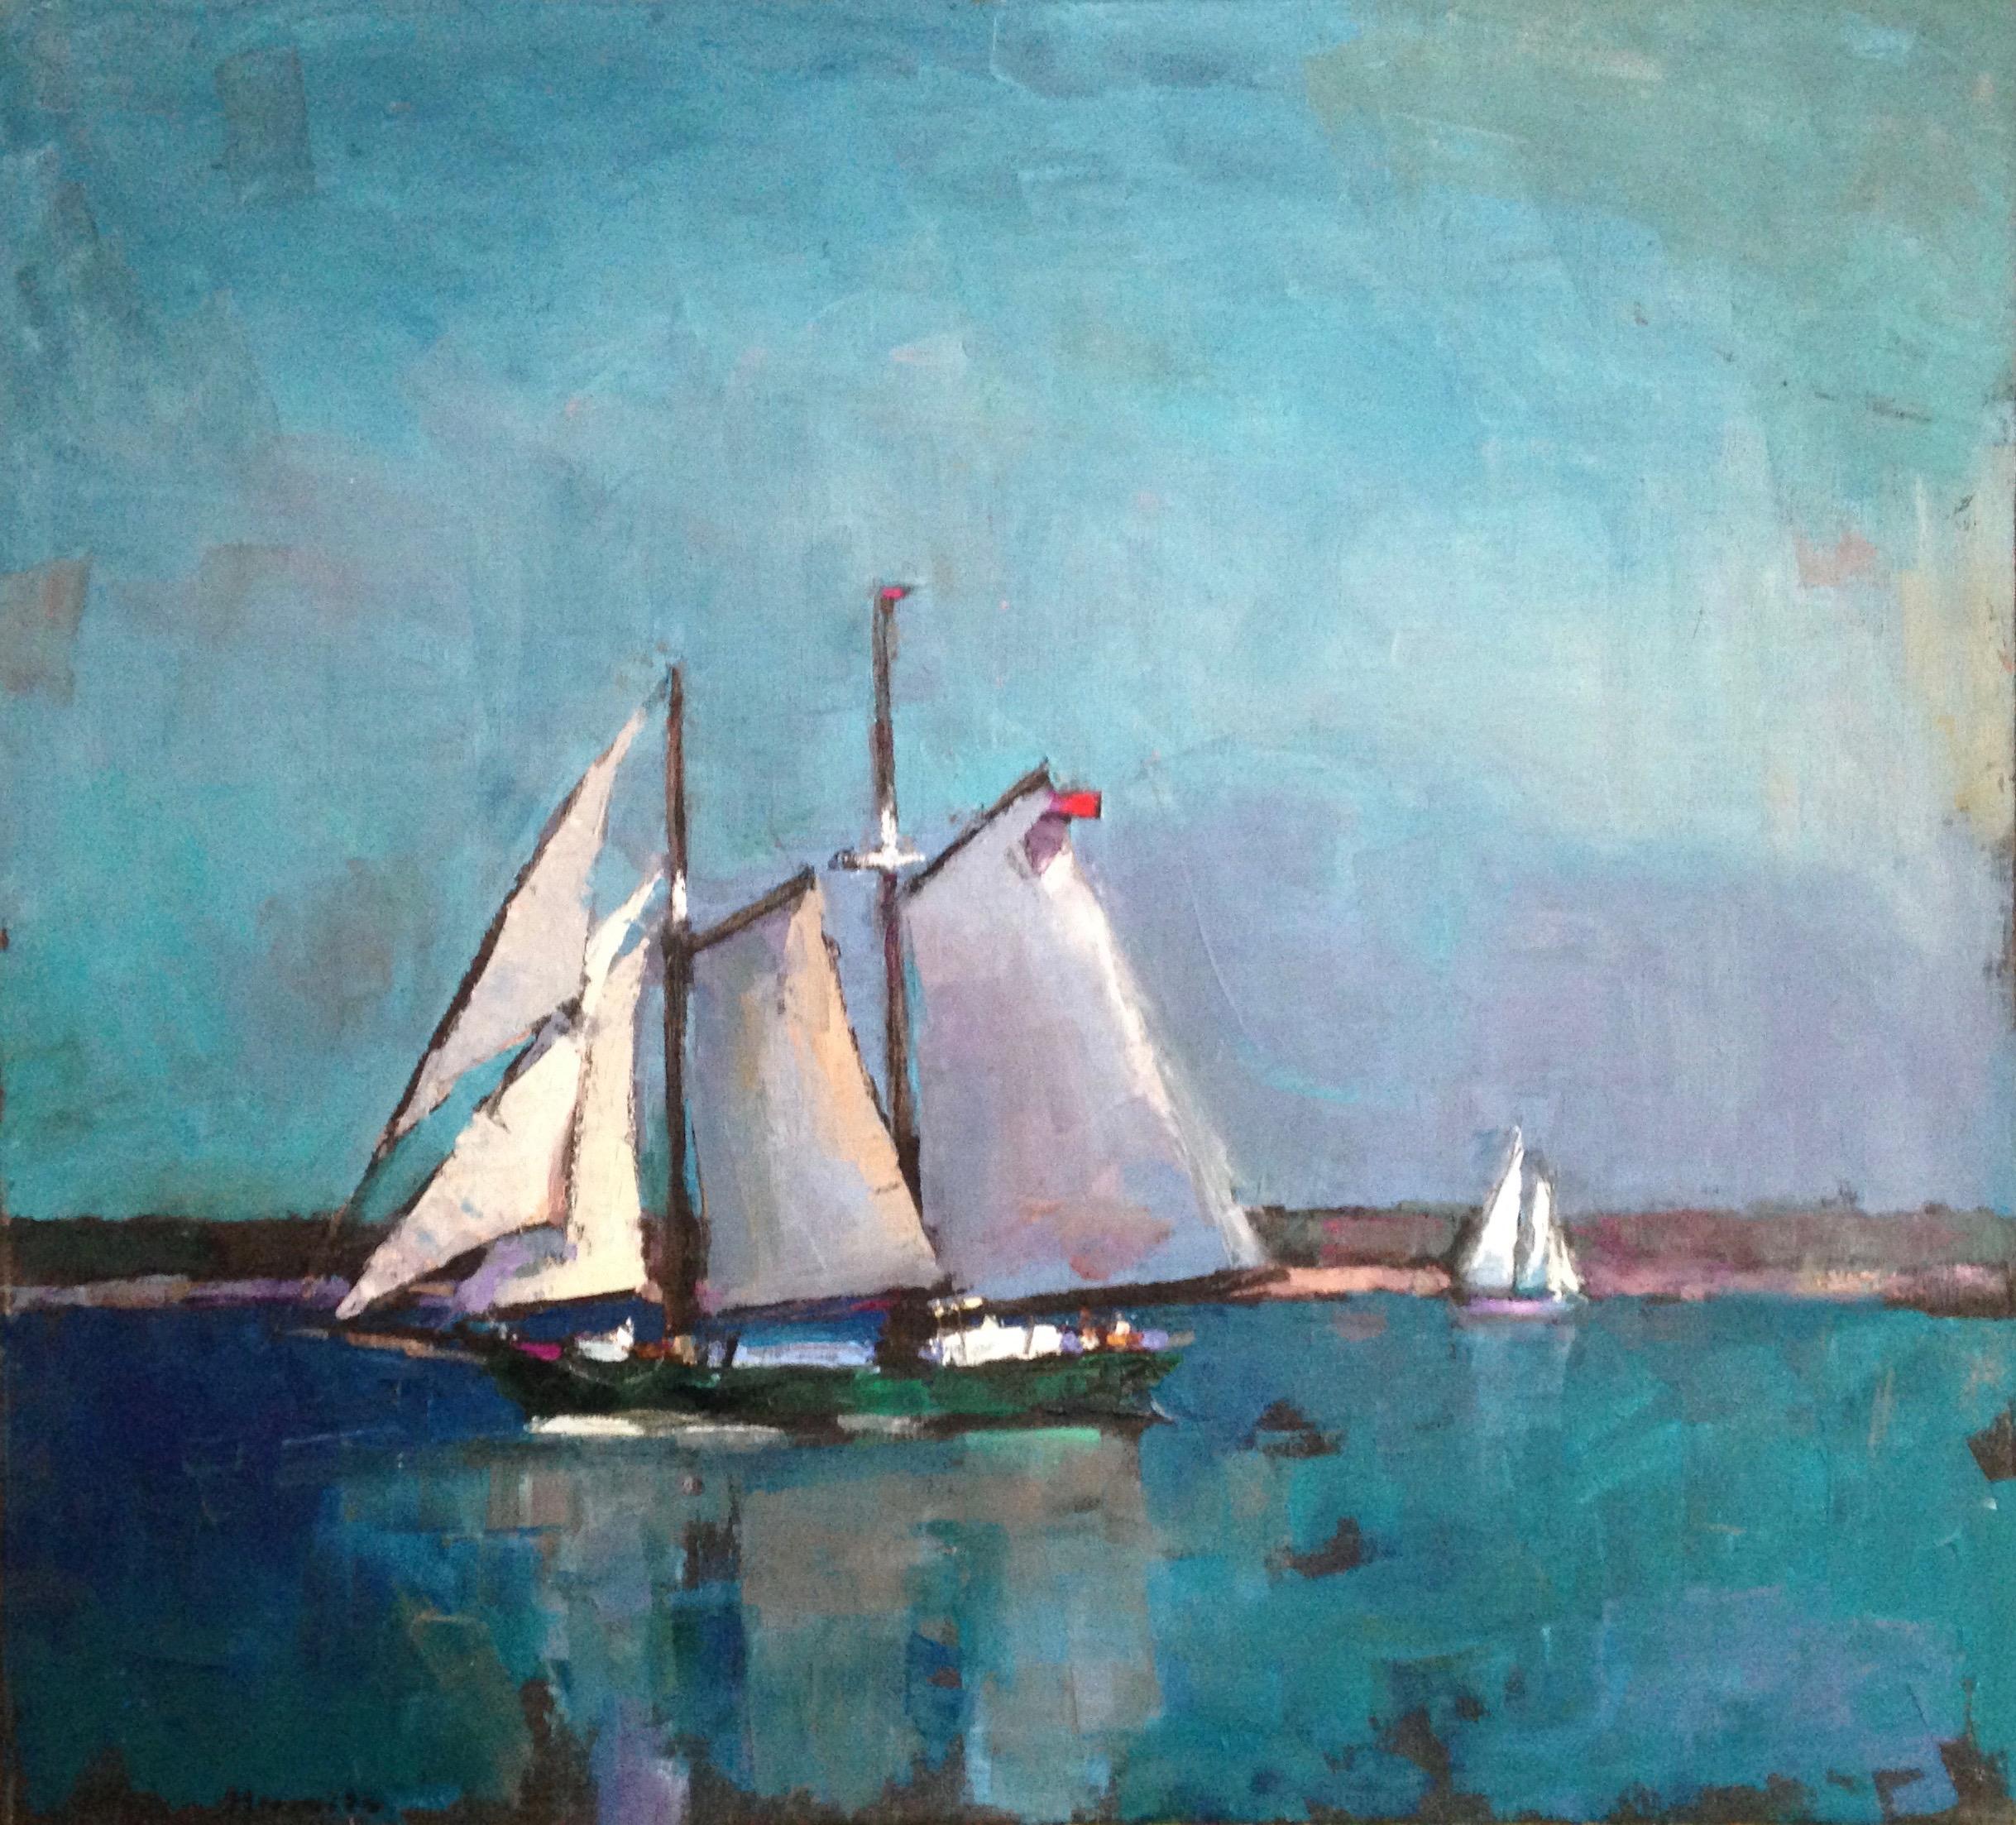 Larry Horowitz Landscape Painting - "Passing Schooners" oil painting of sailboats with teal water and sky